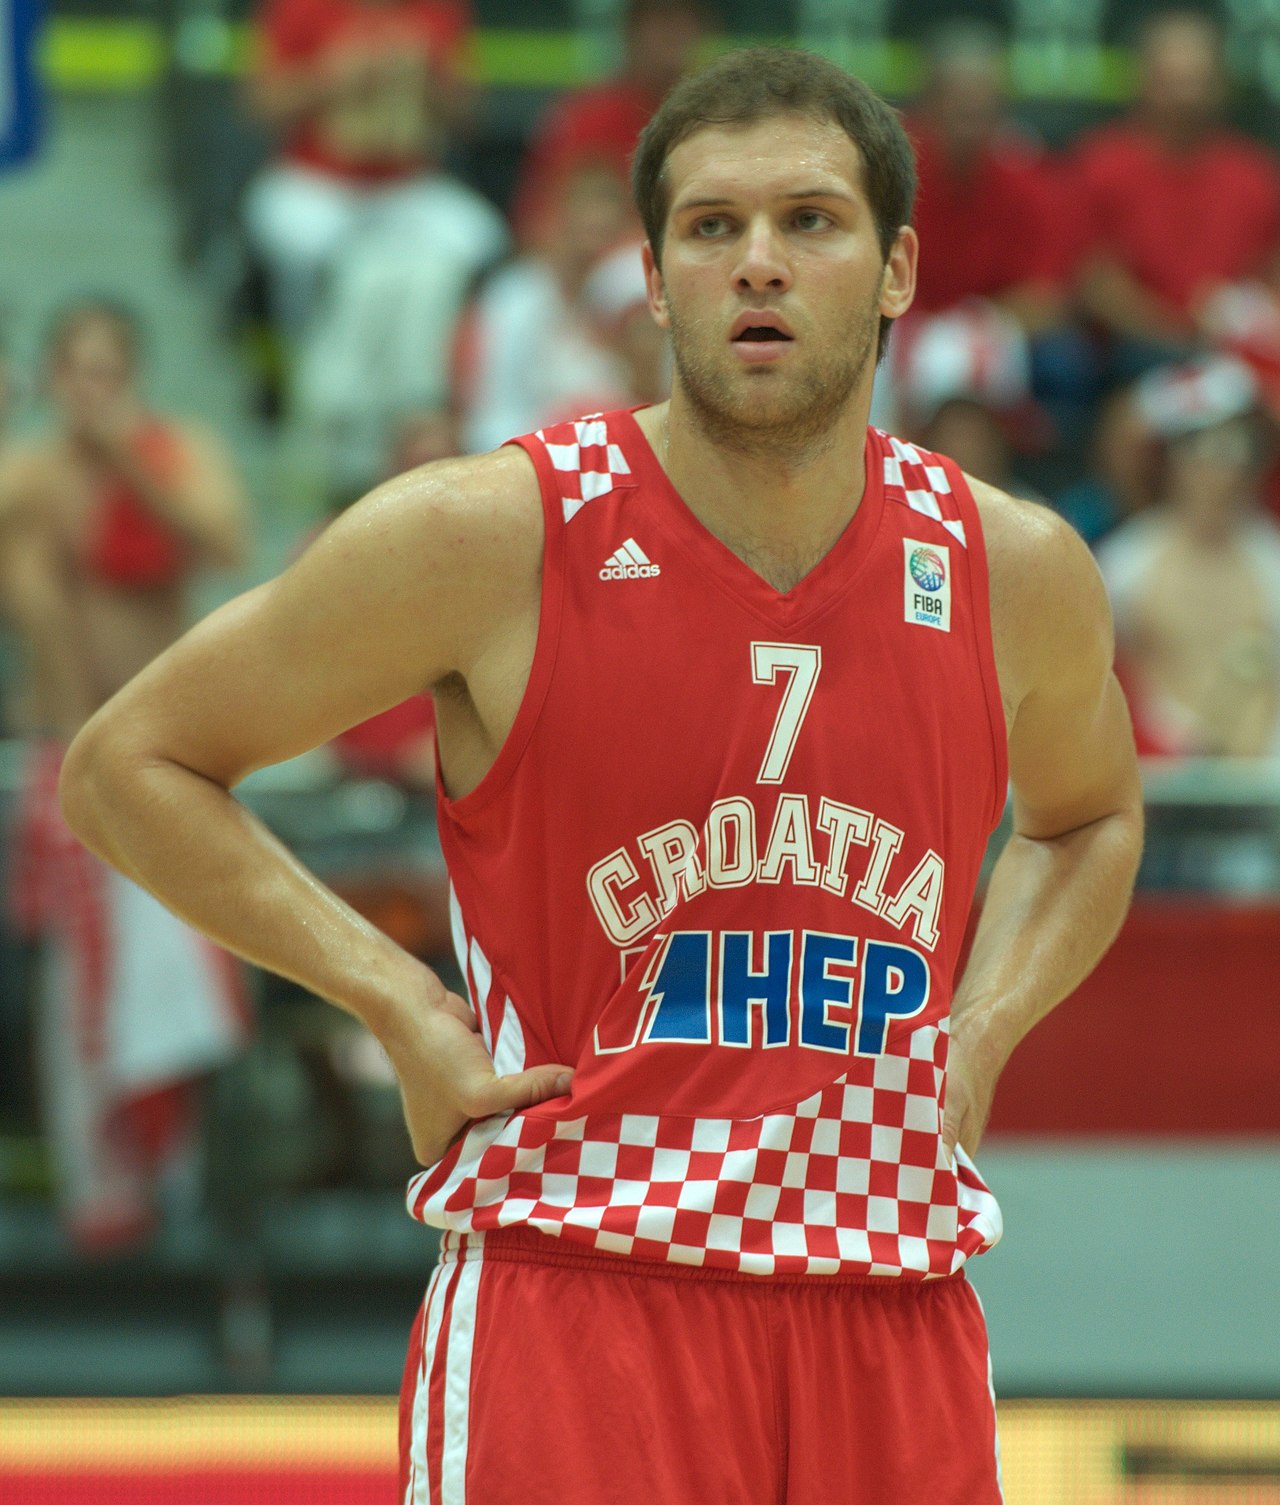 Croatian-American basketball star defies odds to make USA World Cup roster